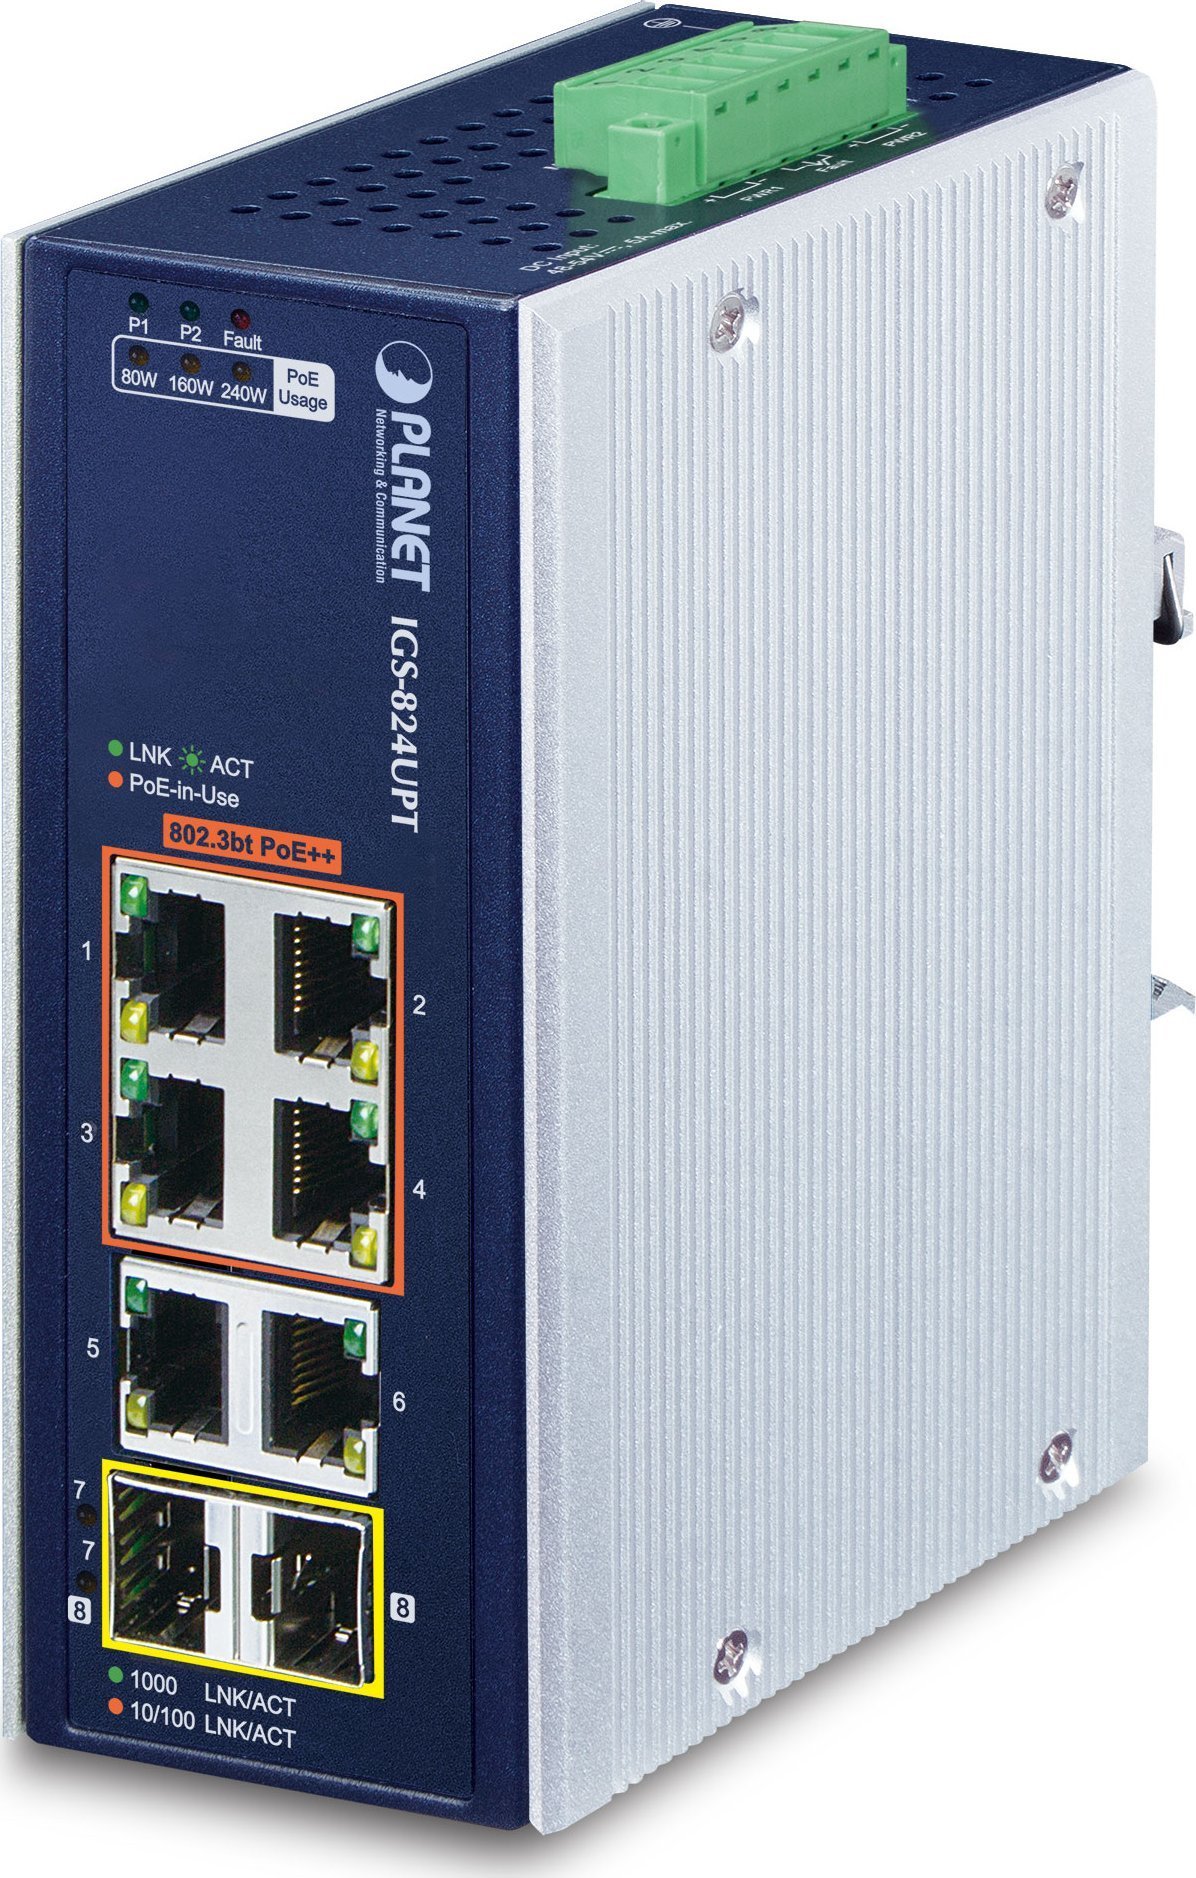 Switch Planet PLANET Industrial 4-Port GE 802.3at + 2 GE + 2 100/1000X SFP